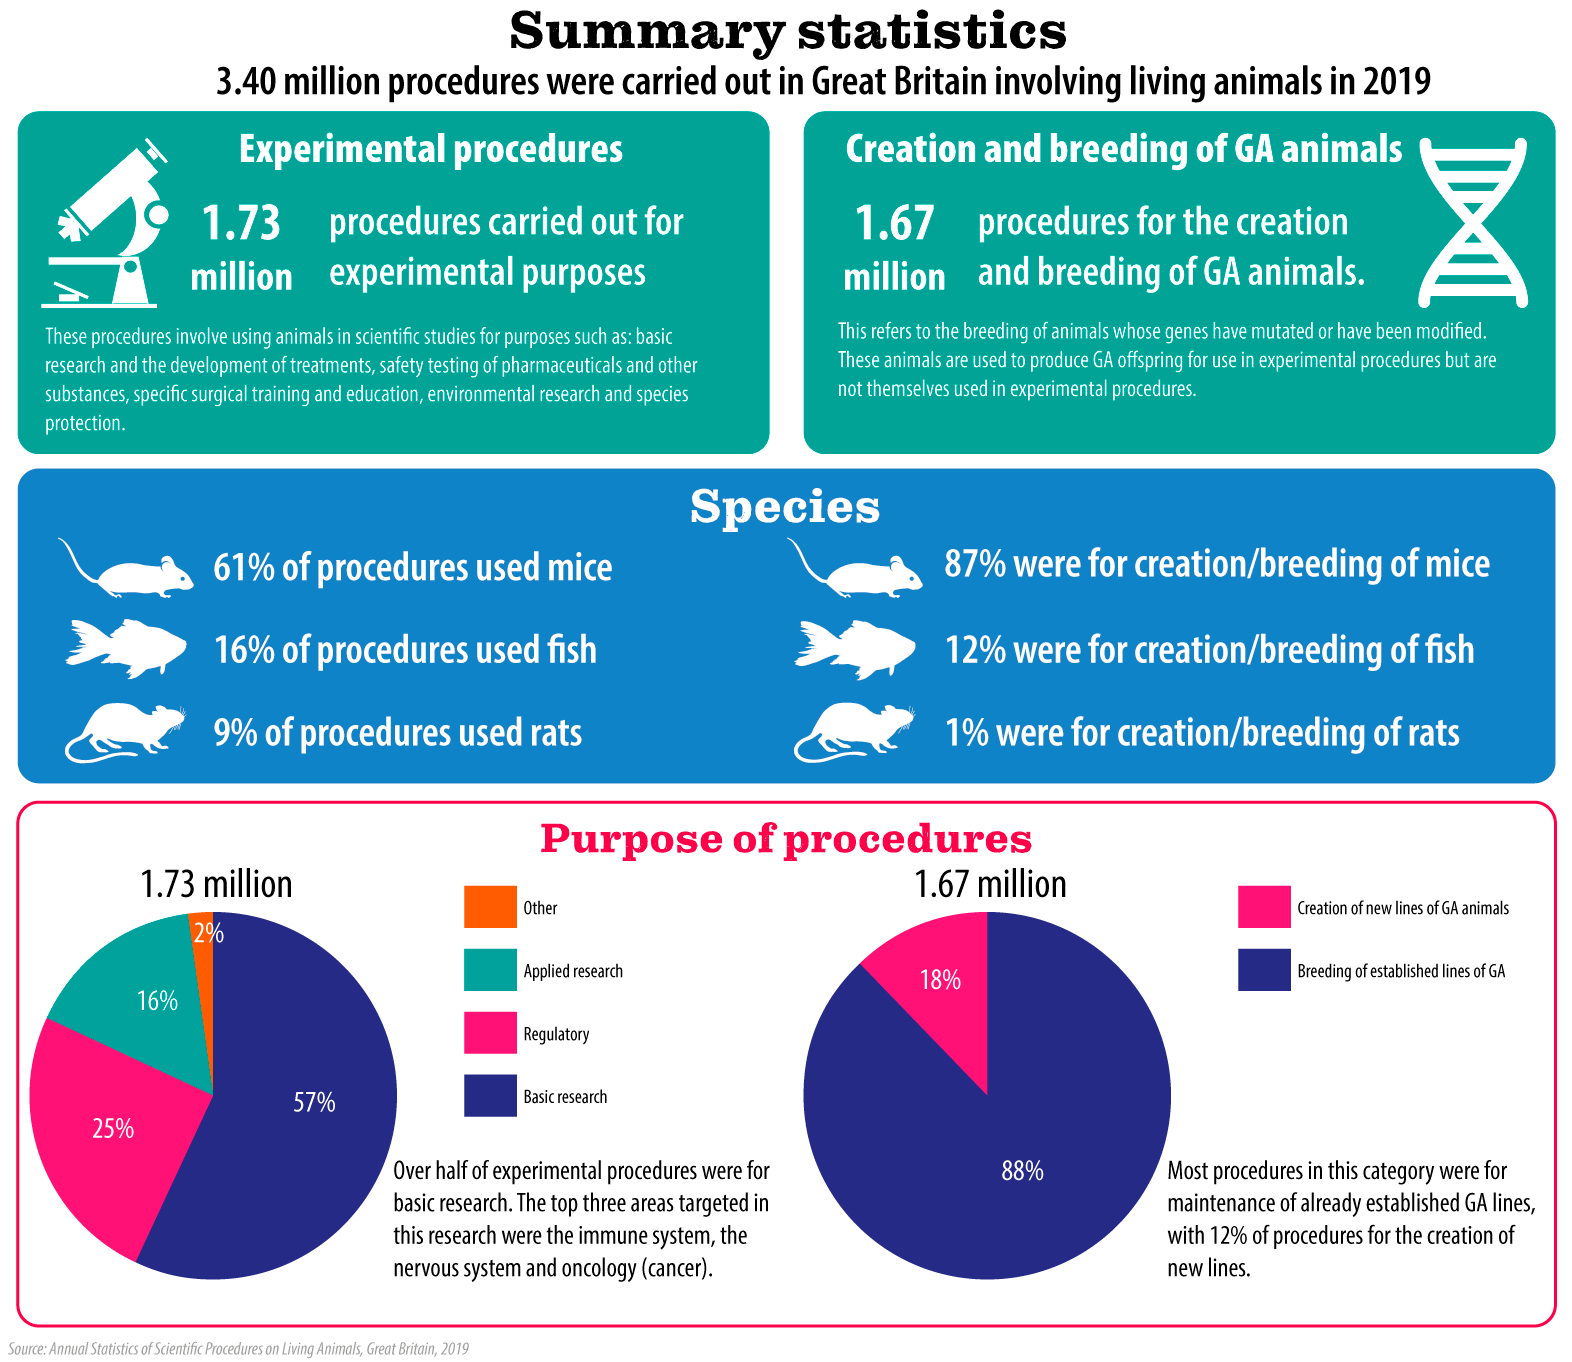 Annual Statistics of Scientific Procedures on Living Animals, Great  Britain, 2019 - Animal Rights - Issues Online